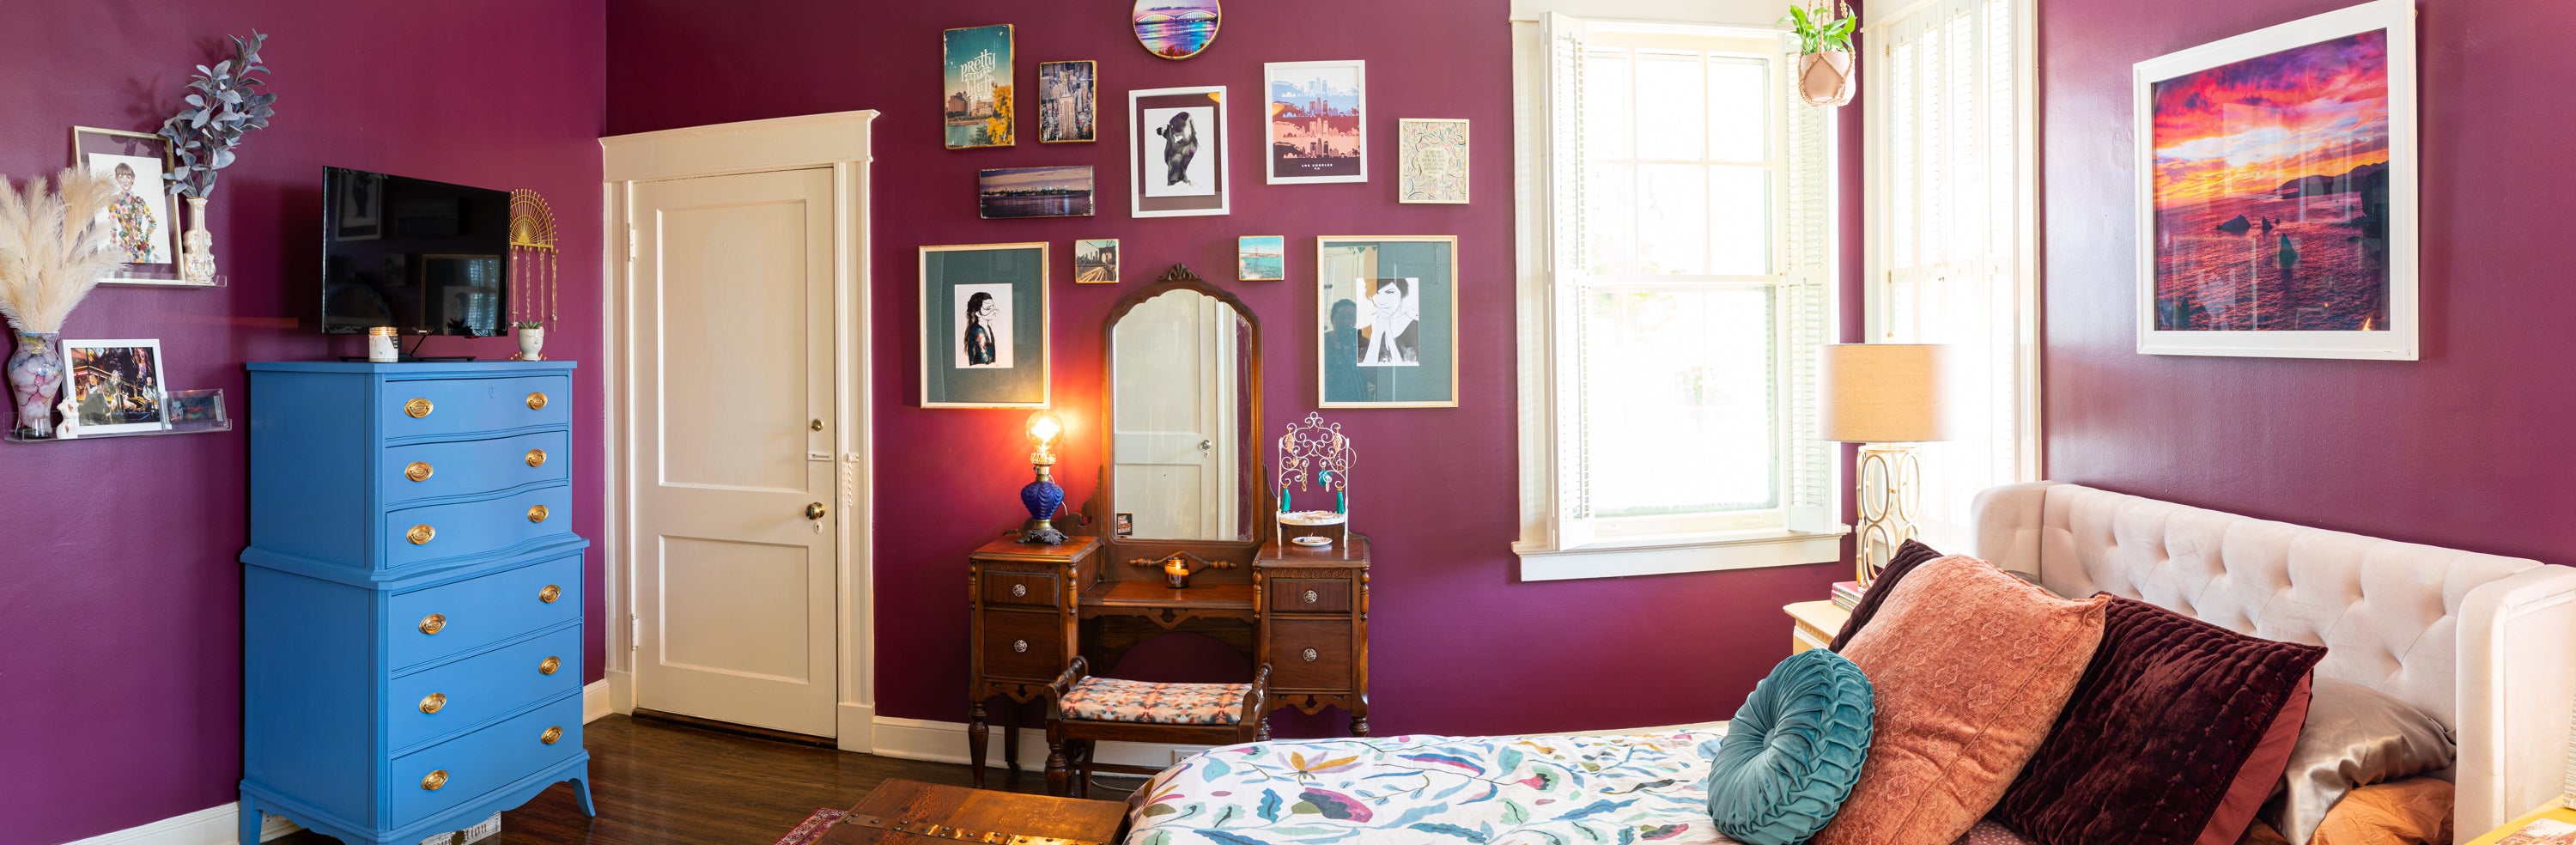 panoramic view of purple bedroom and decor